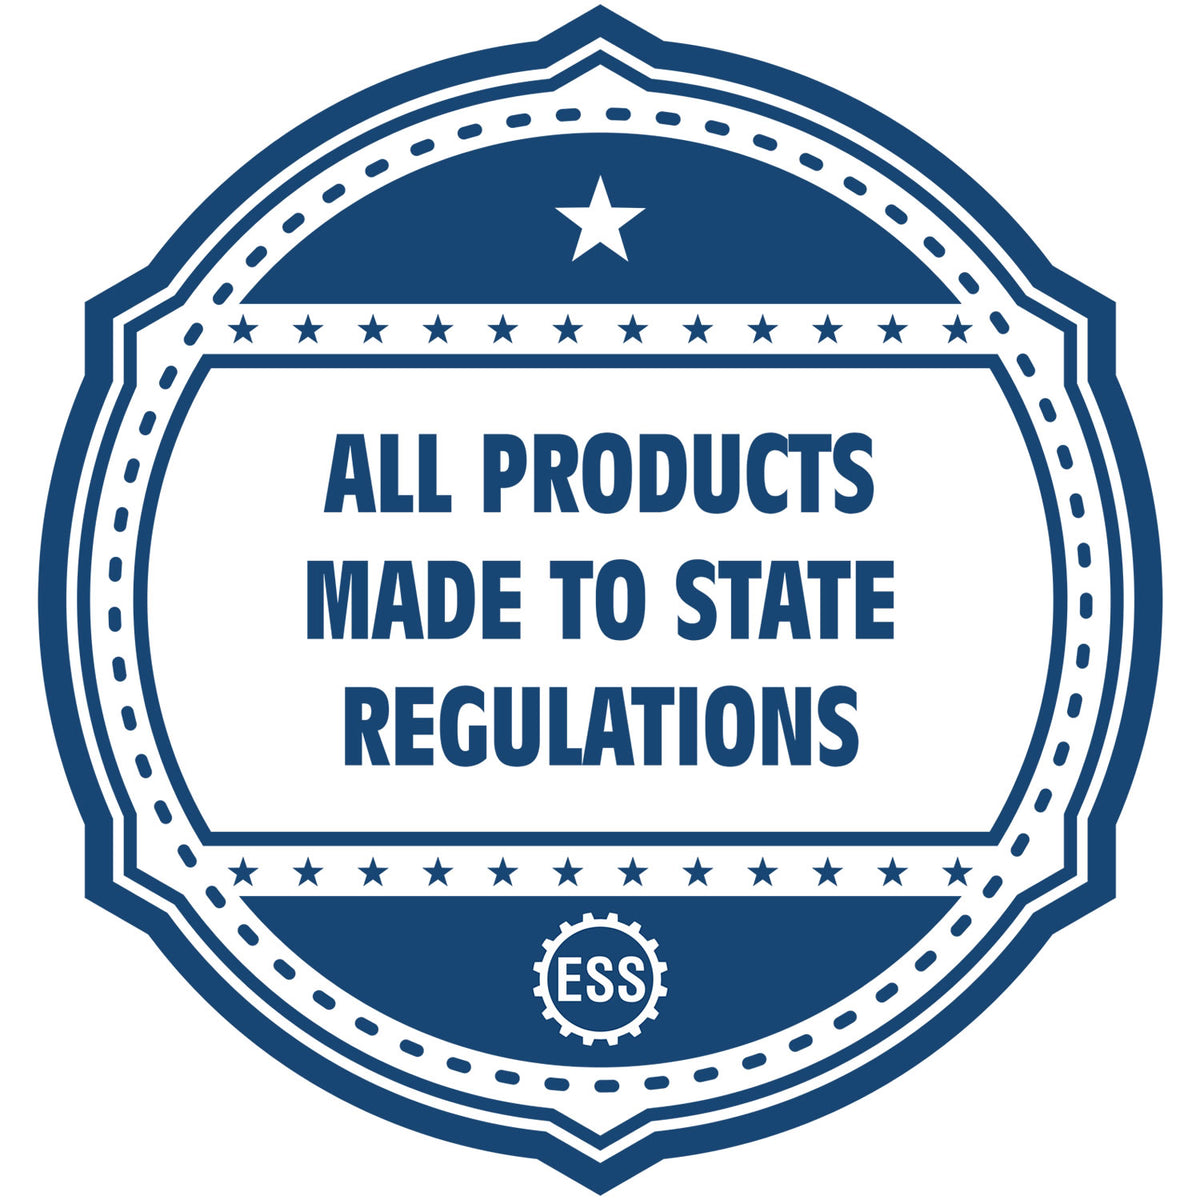 An icon or badge element for the Heavy-Duty Wisconsin Rectangular Notary Stamp showing that this product is made in compliance with state regulations.